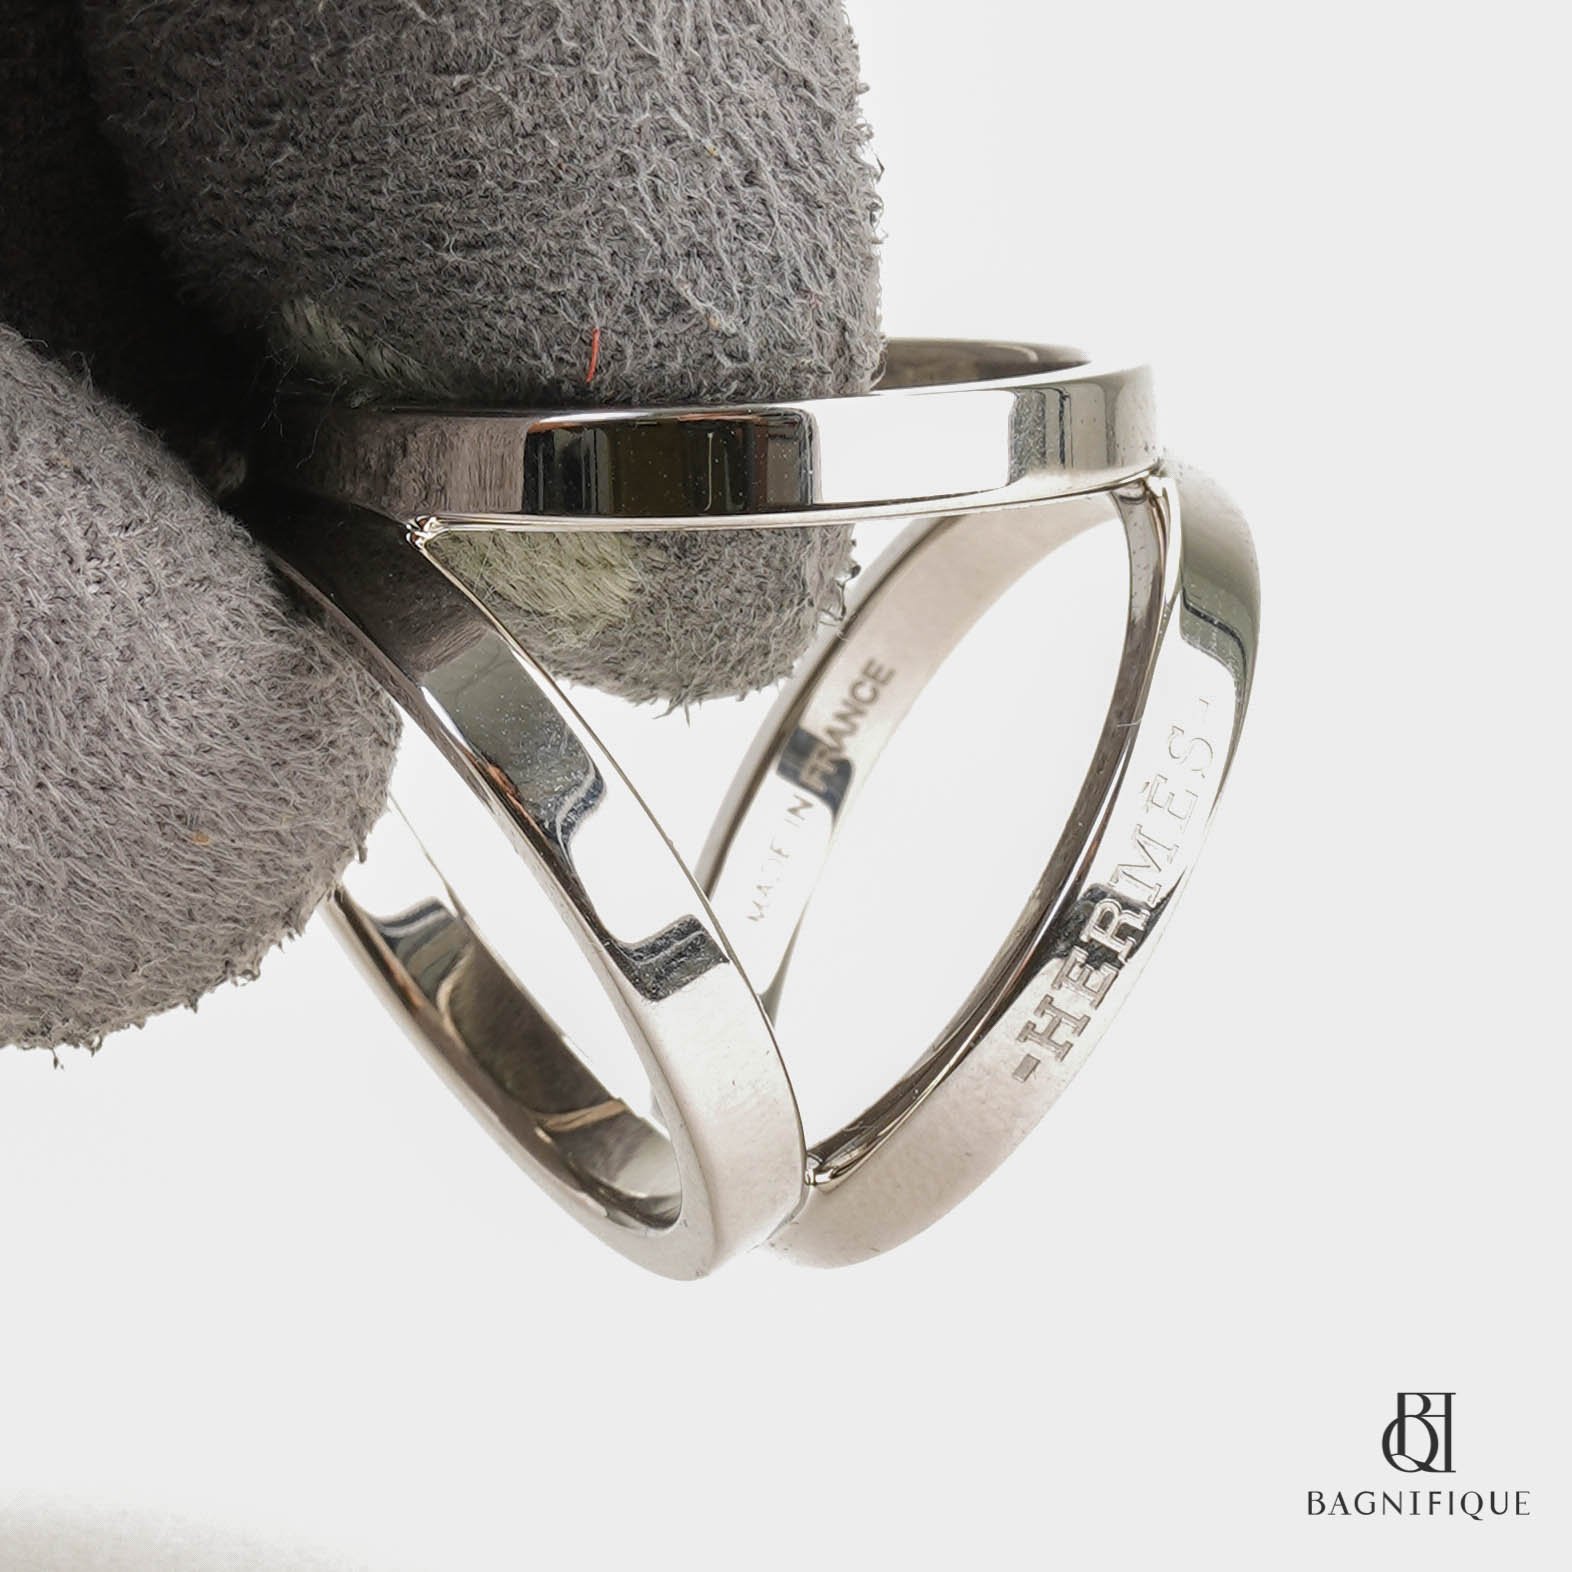 Hermes Trio Scarf Ring, Silver